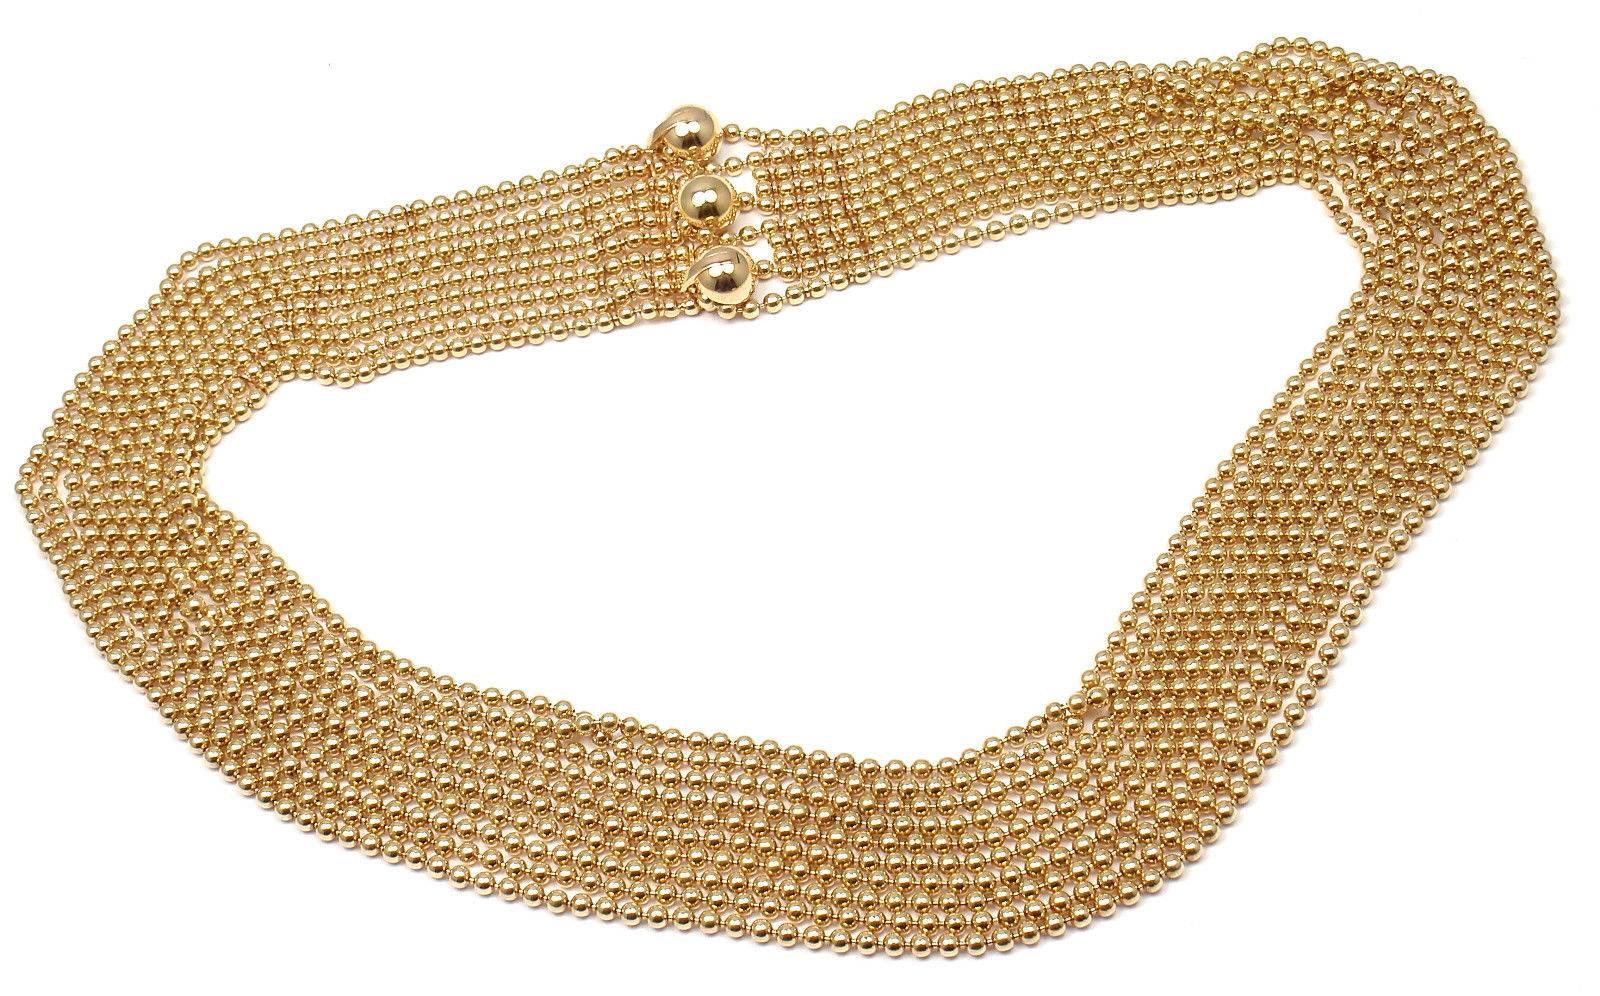 18k Yellow Gold Draperie de Decollete 10 Strand Necklace by Cartier.

This necklace comes with original Cartier box.

Details:
Length: 14 Inches - 19 Inches
Width: 1 inch
Weight: 100.0 grams
Stamped Hallmarks: Cartier 750 825712
*Free